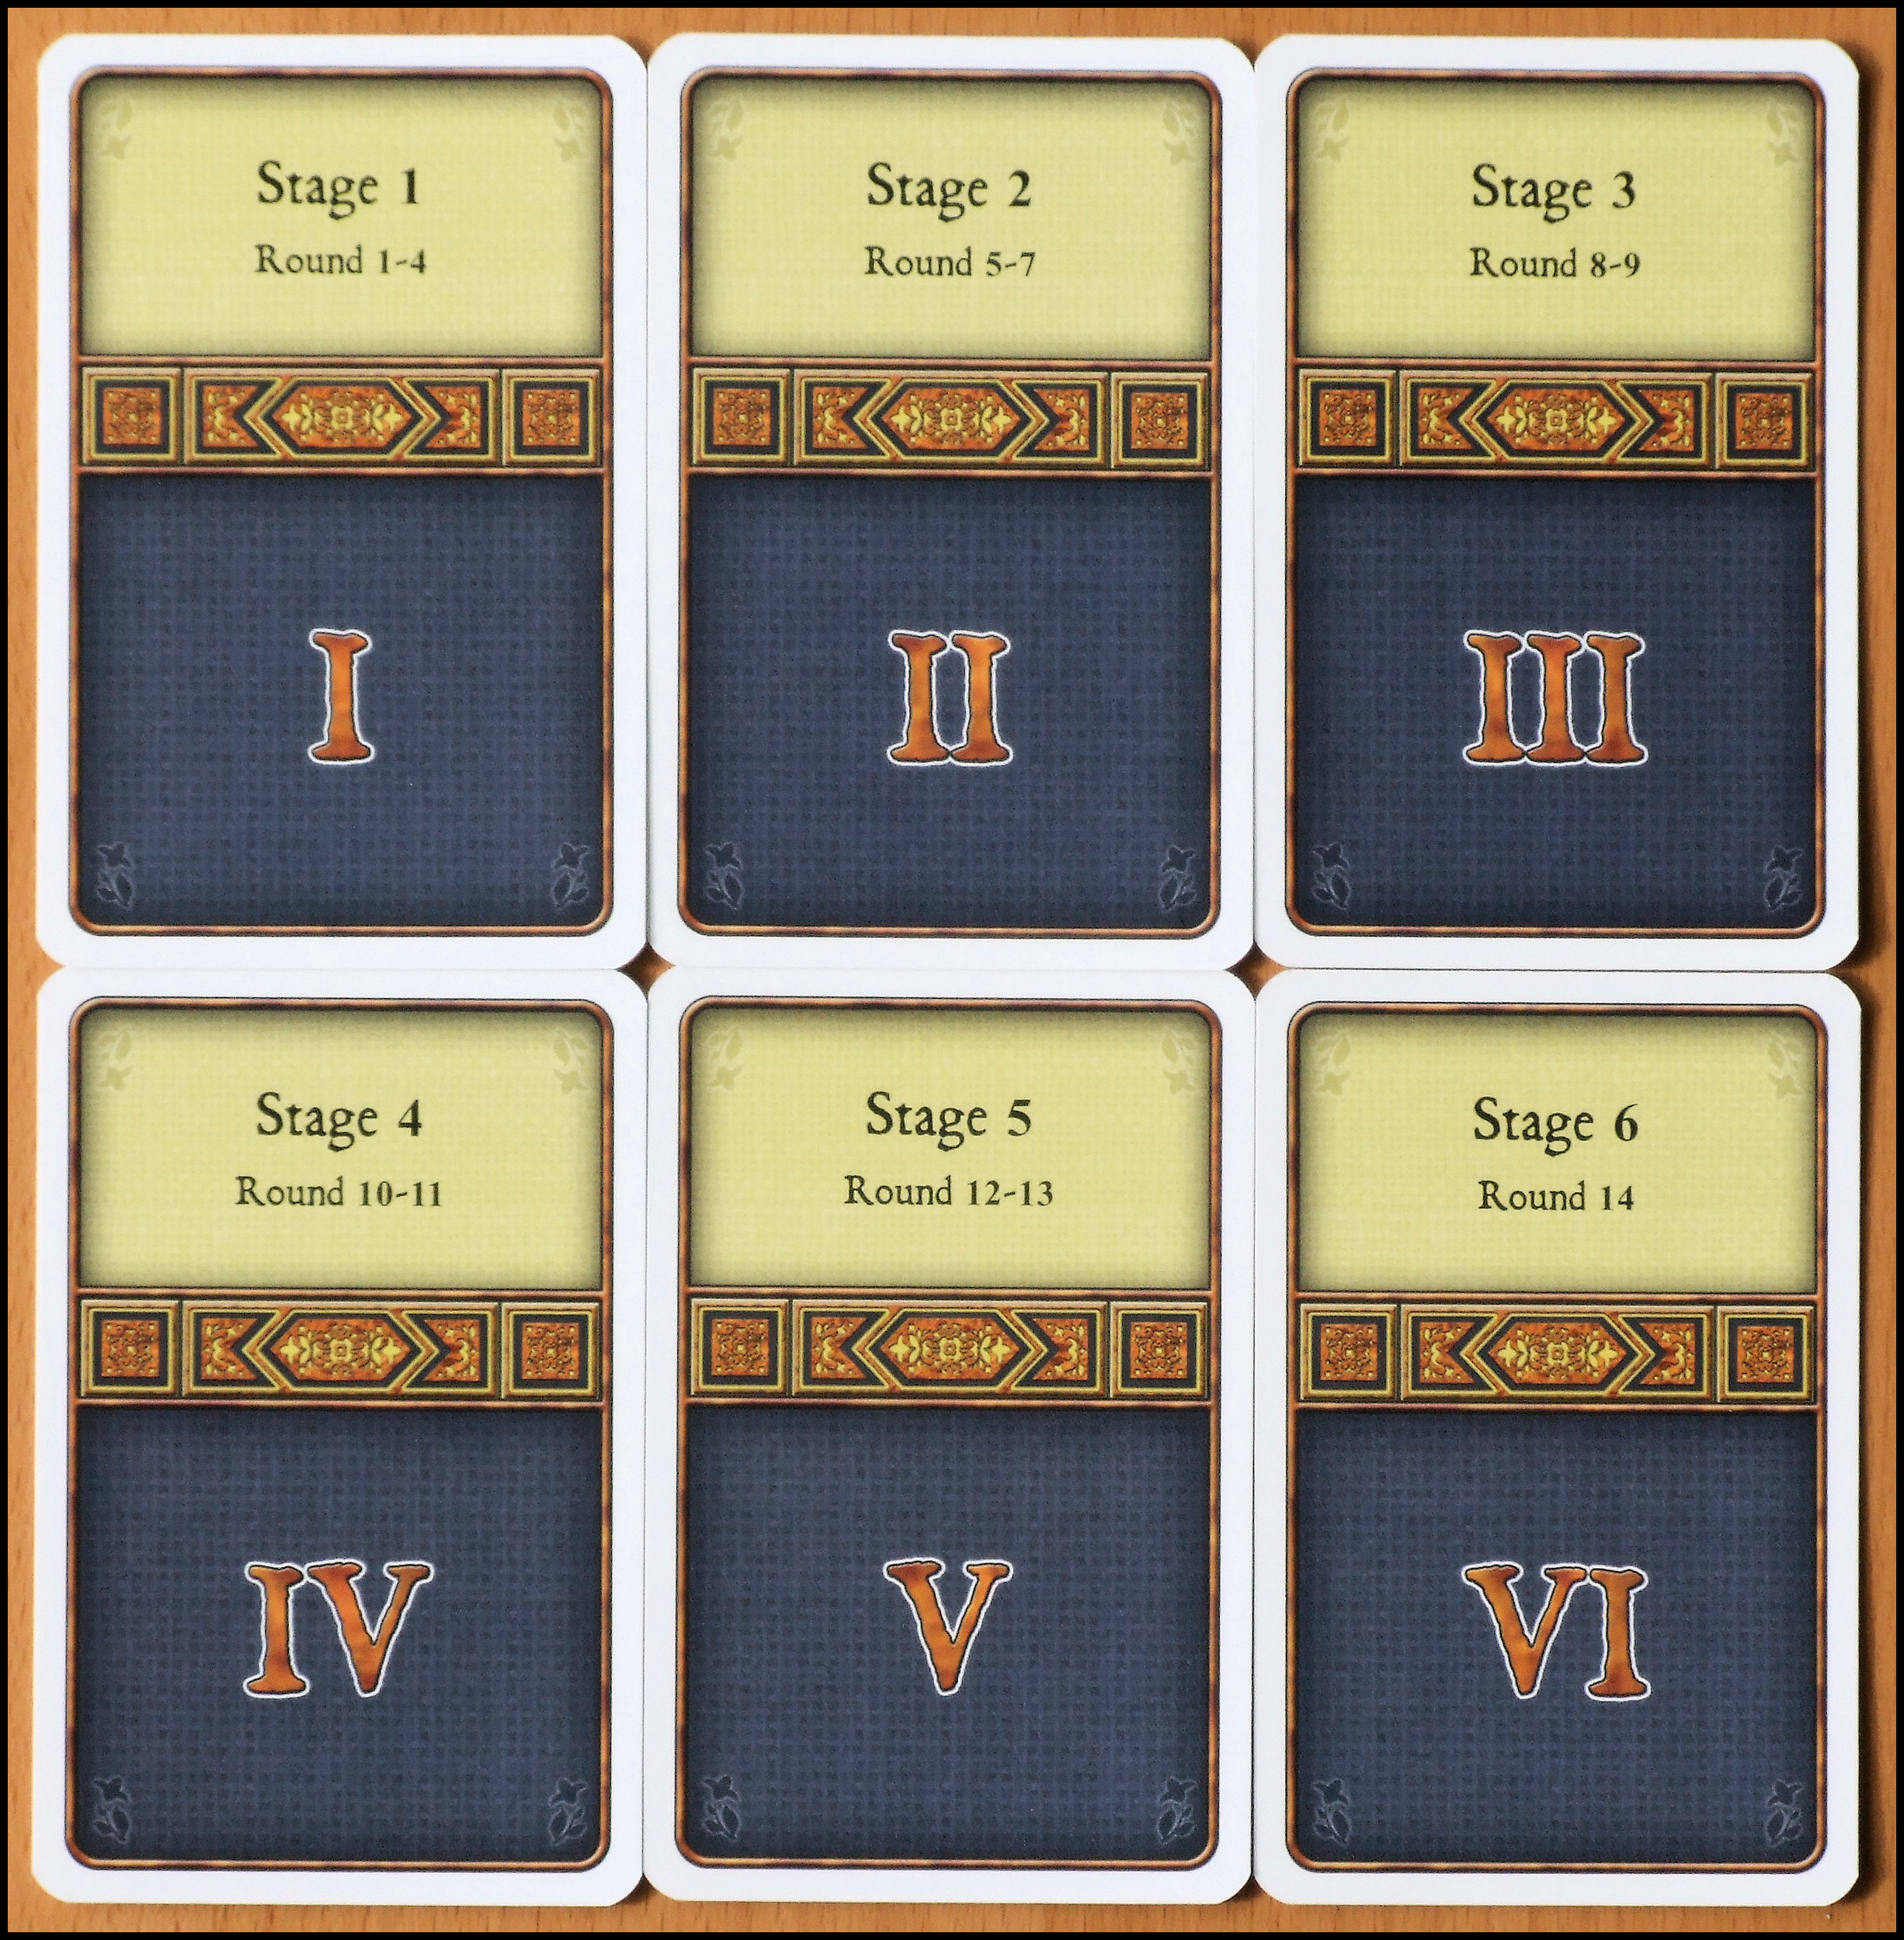 Agricola - Stage Card Backs (Z-Man Games Edition)